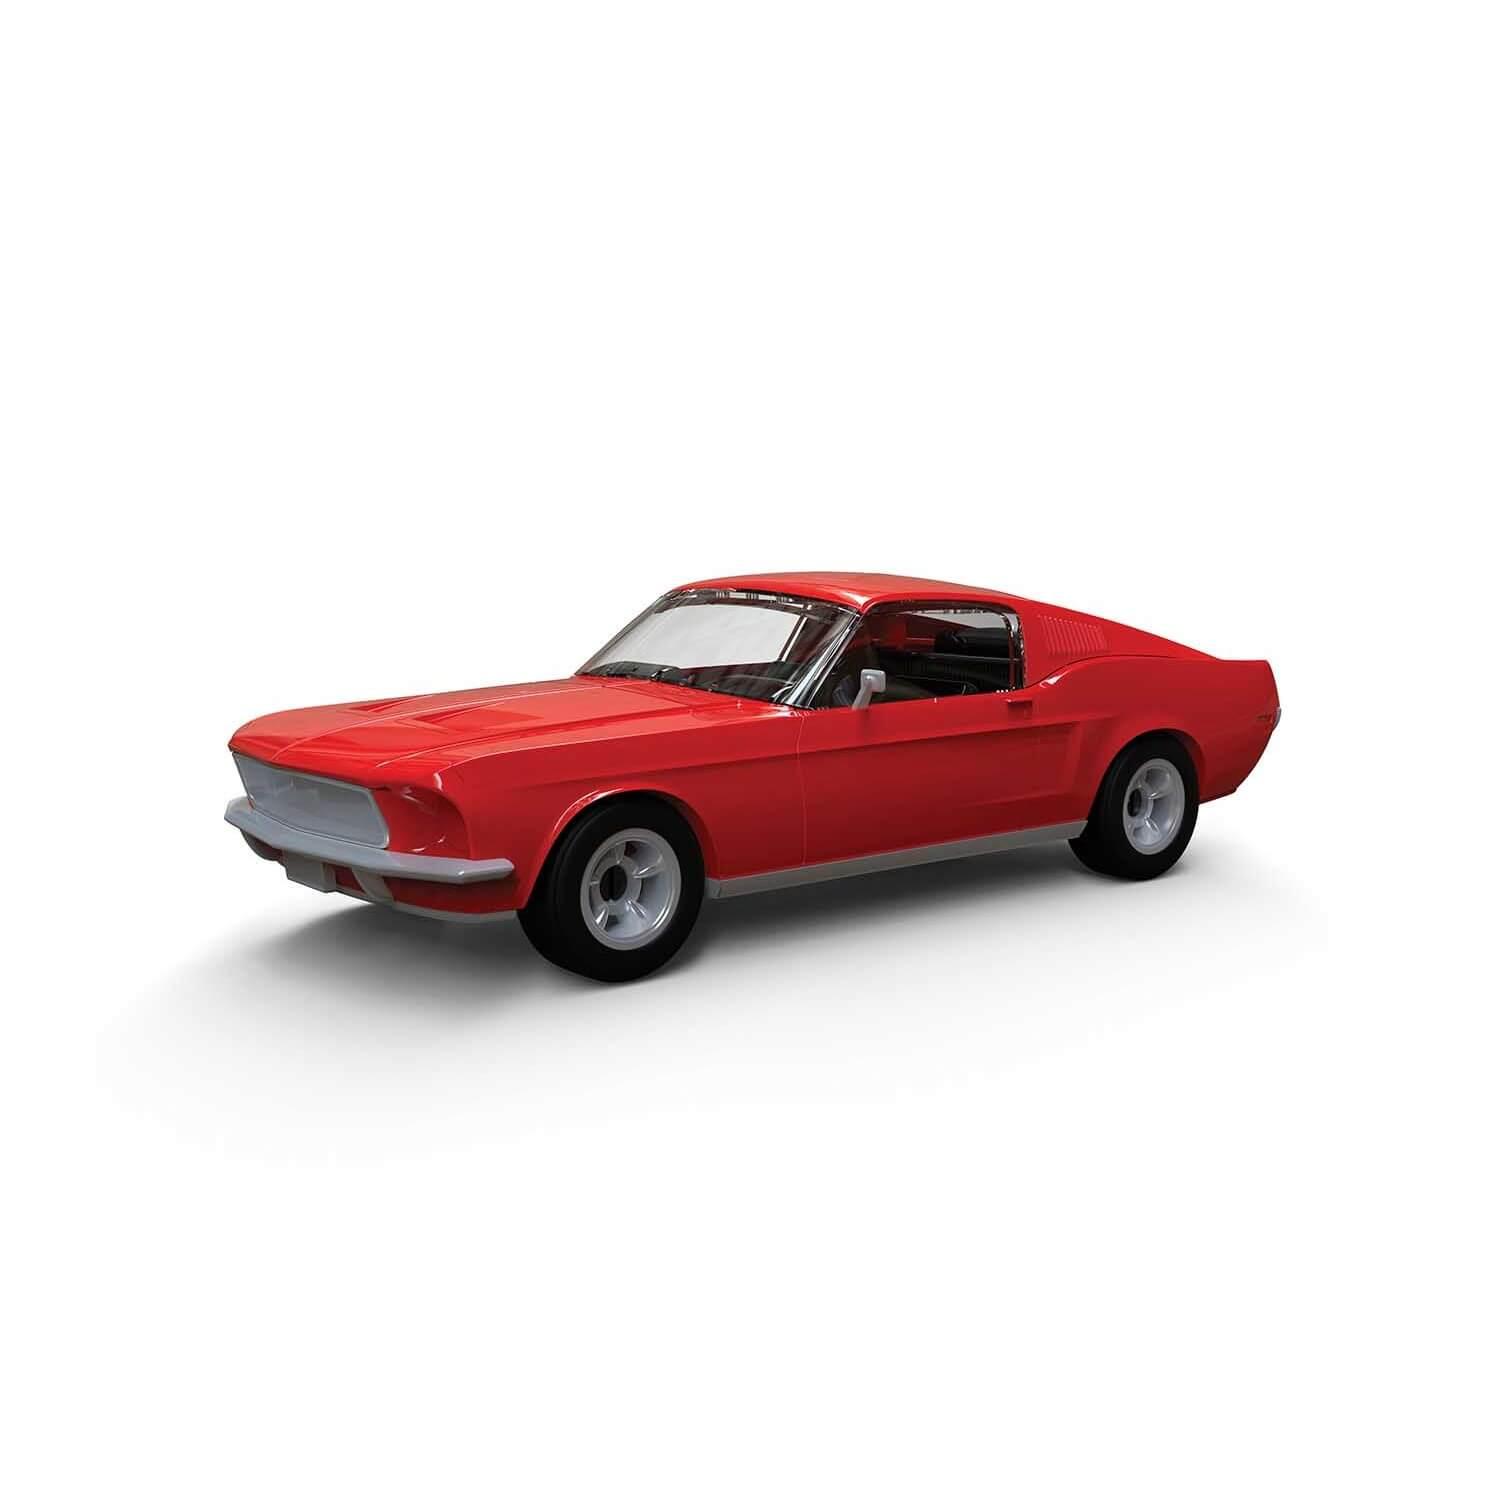 Maquette voiture : Quickbuild : Ford Mustang GT 196 - Airfix - Rue